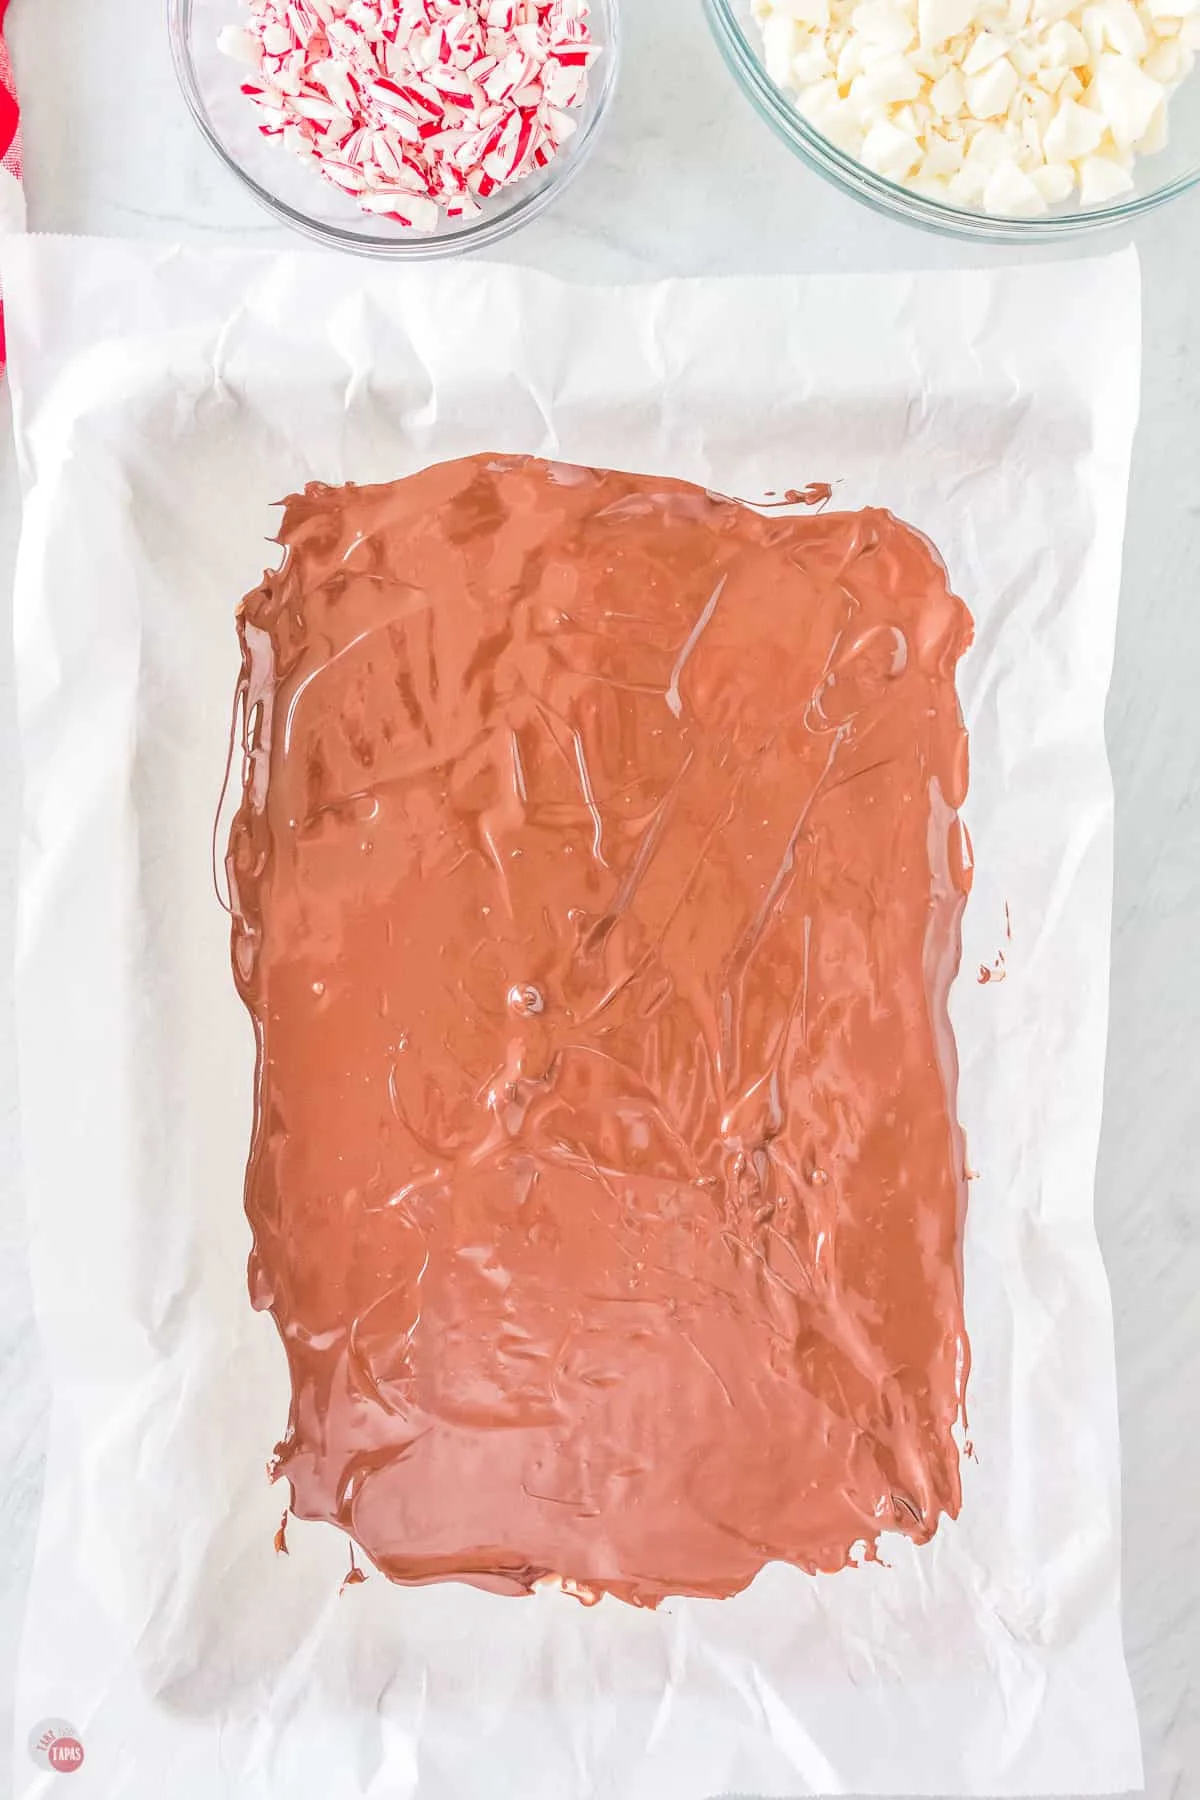 melted milk chocolate on parchment paper